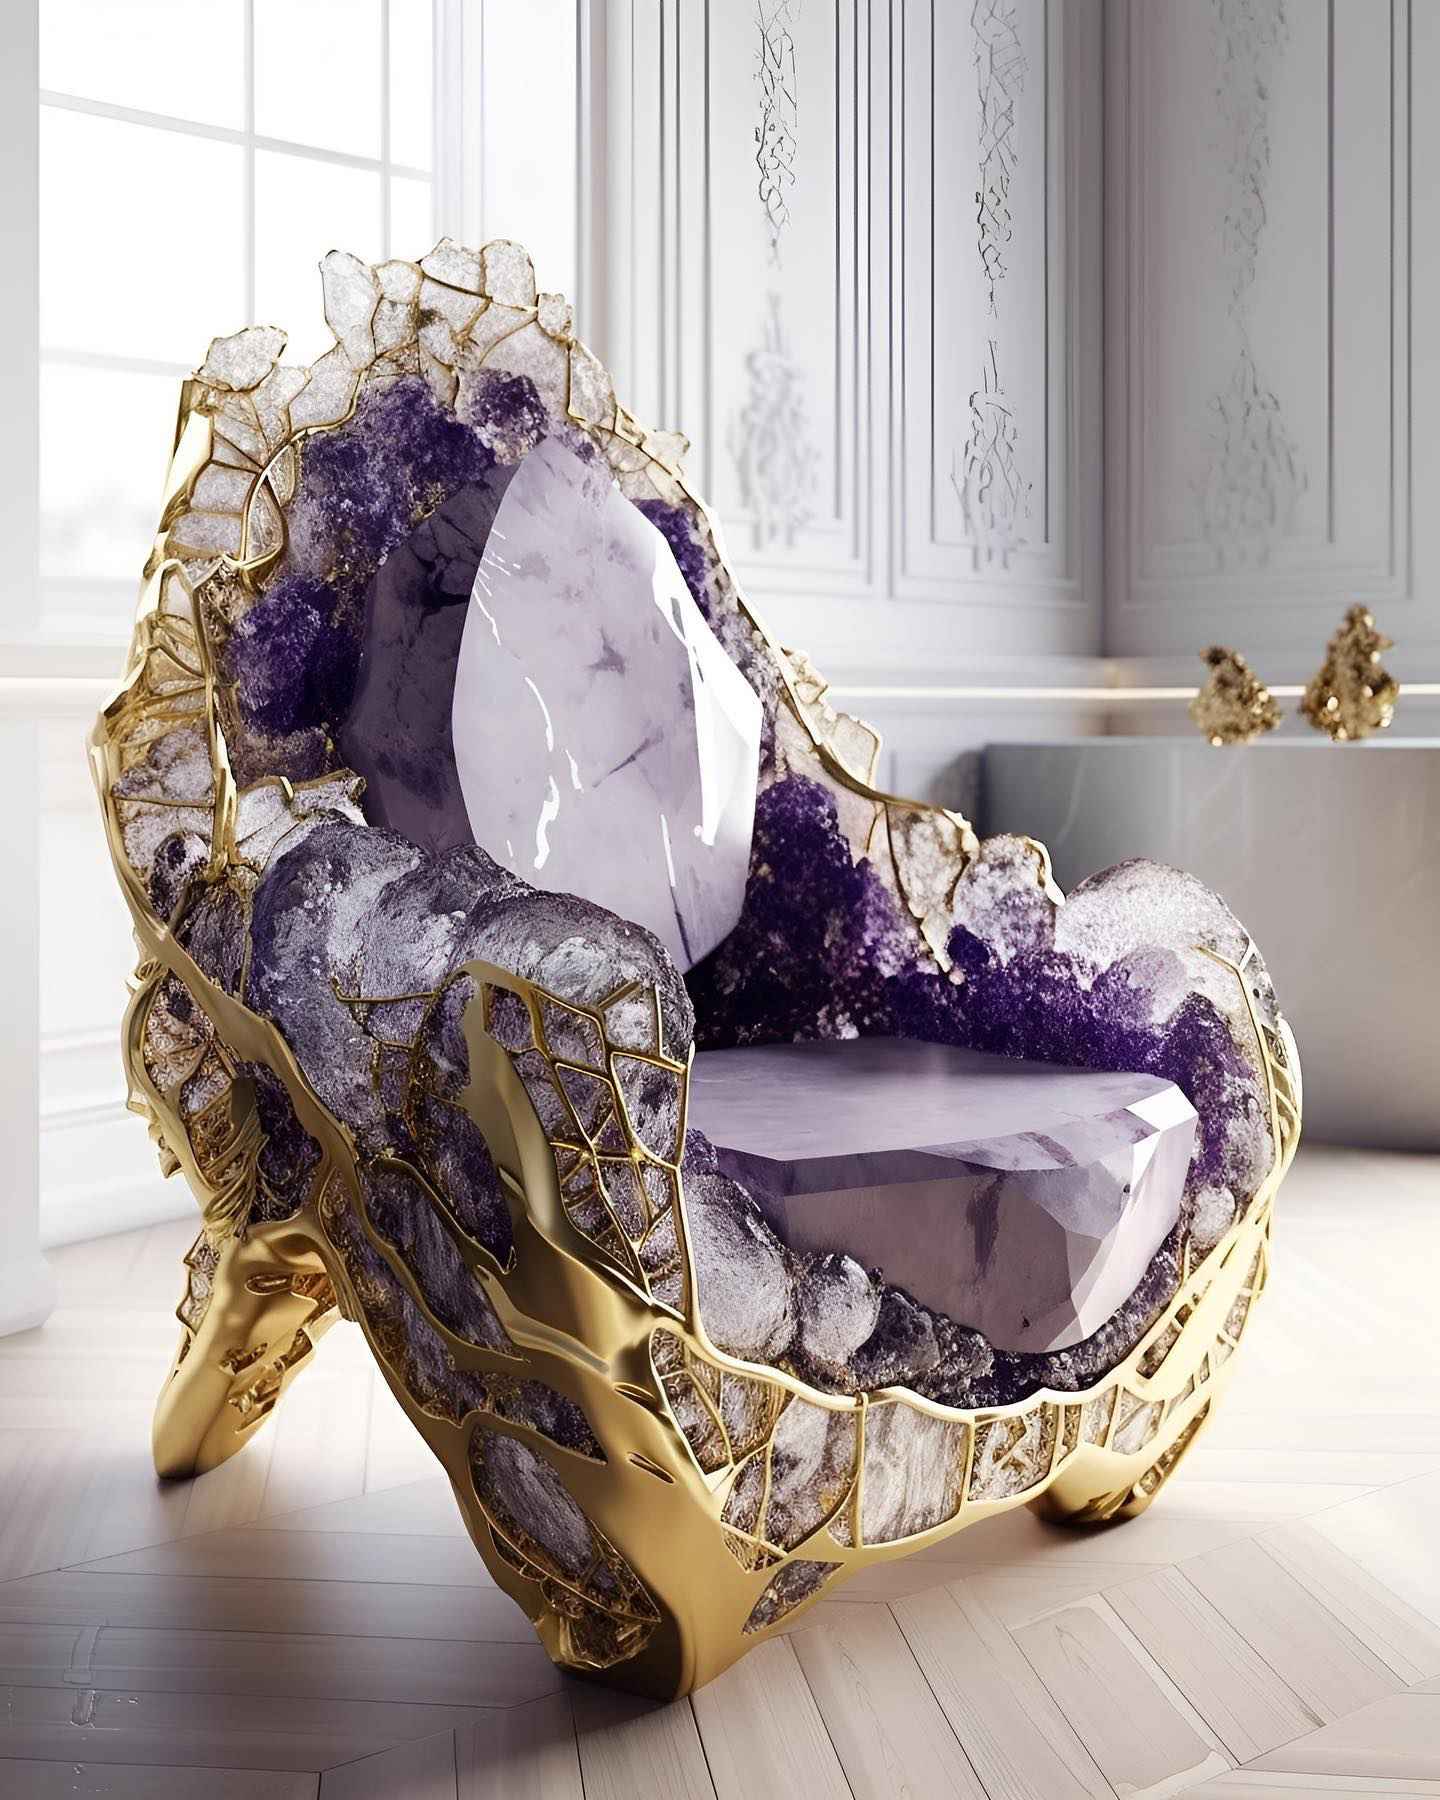 Geode Chairs - The Splendor and Grandeur of Chairs and Chaise Lounges Made from Multicolored Quartz